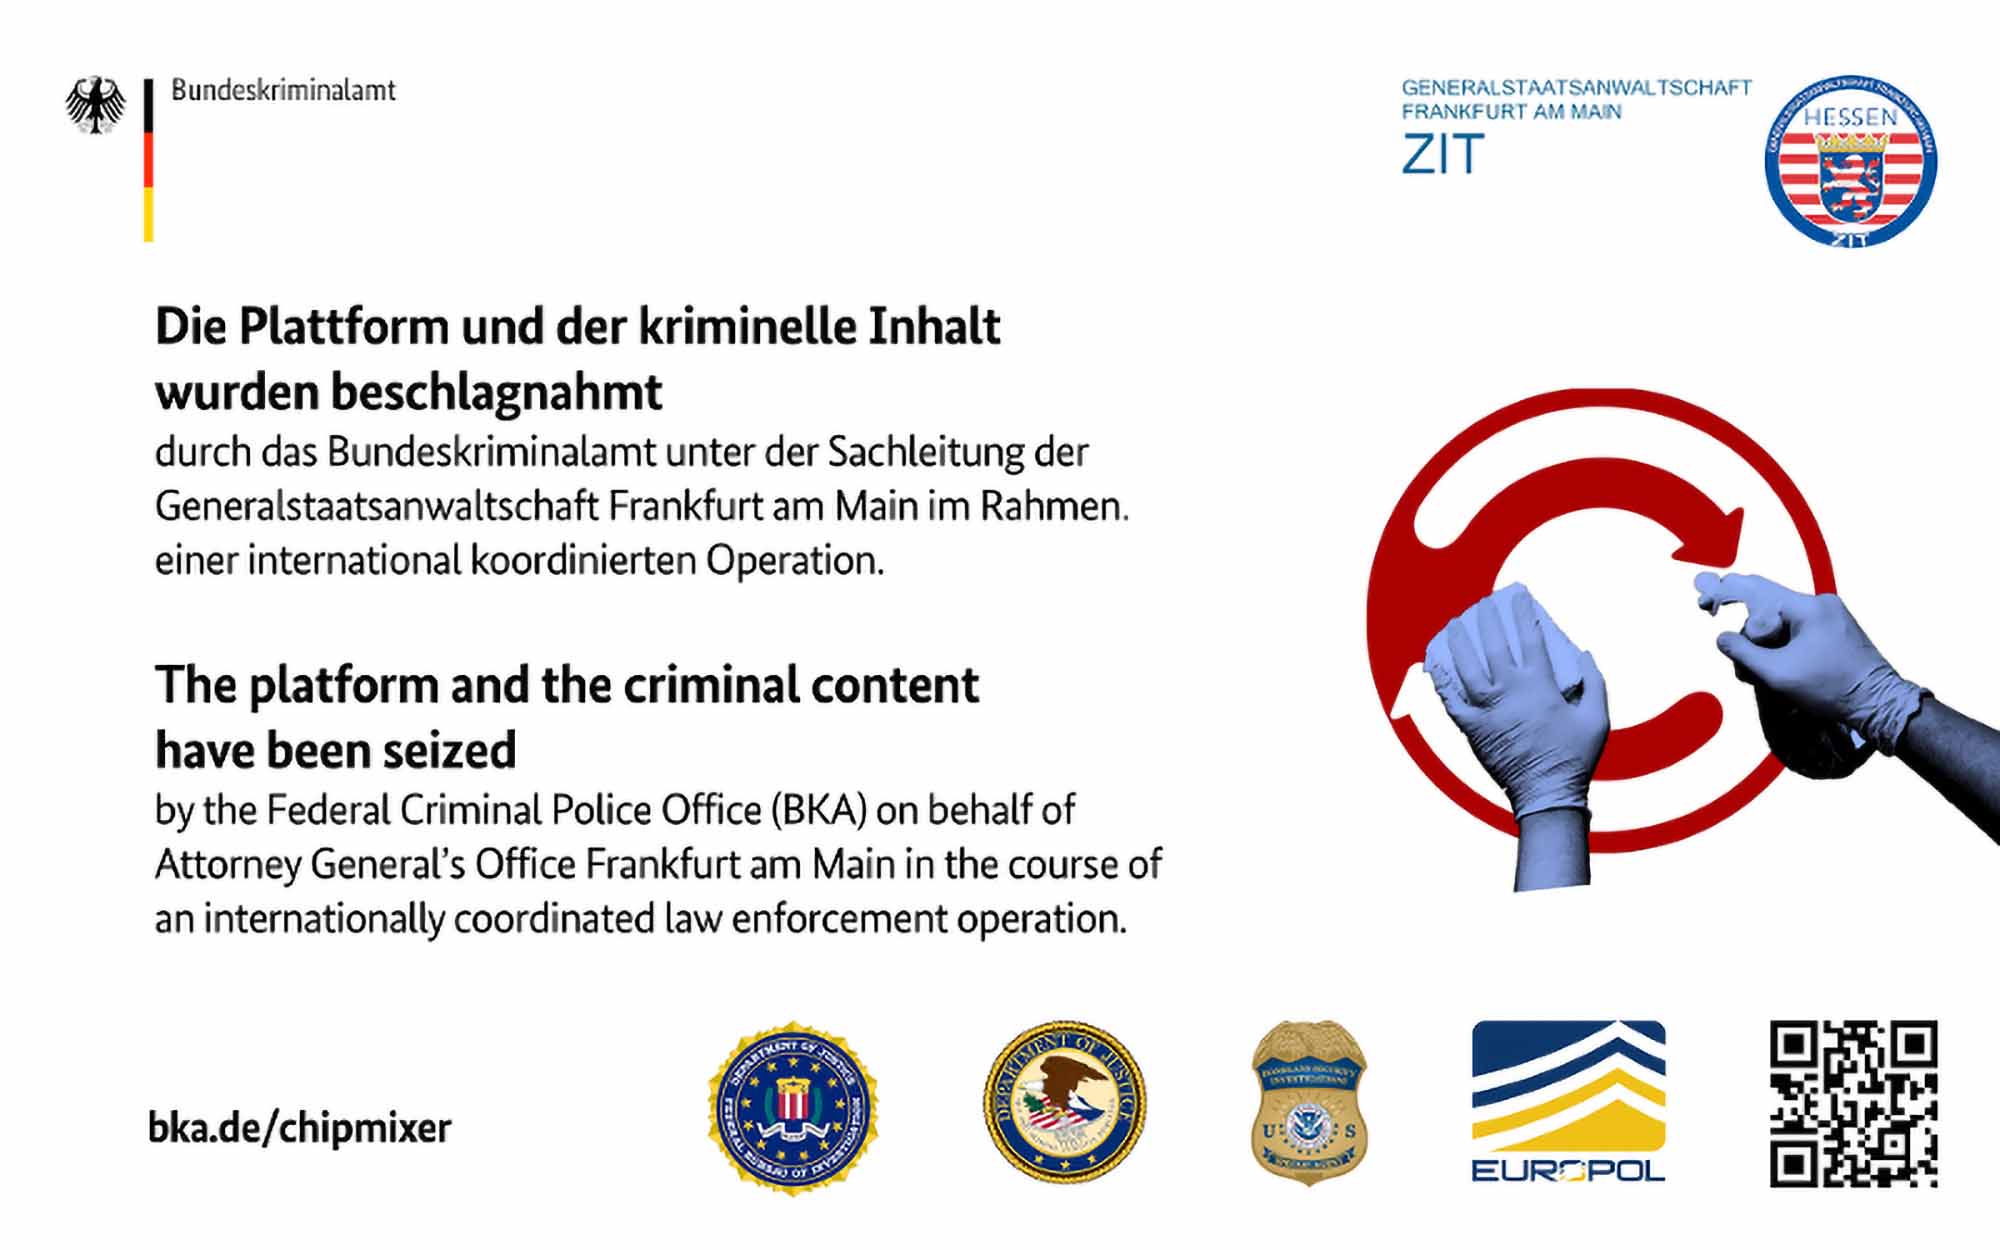 US And German Authorities Shut Down World’s Largest Darknet Money Laundering Platform And Seize EUR 44m In Crypto